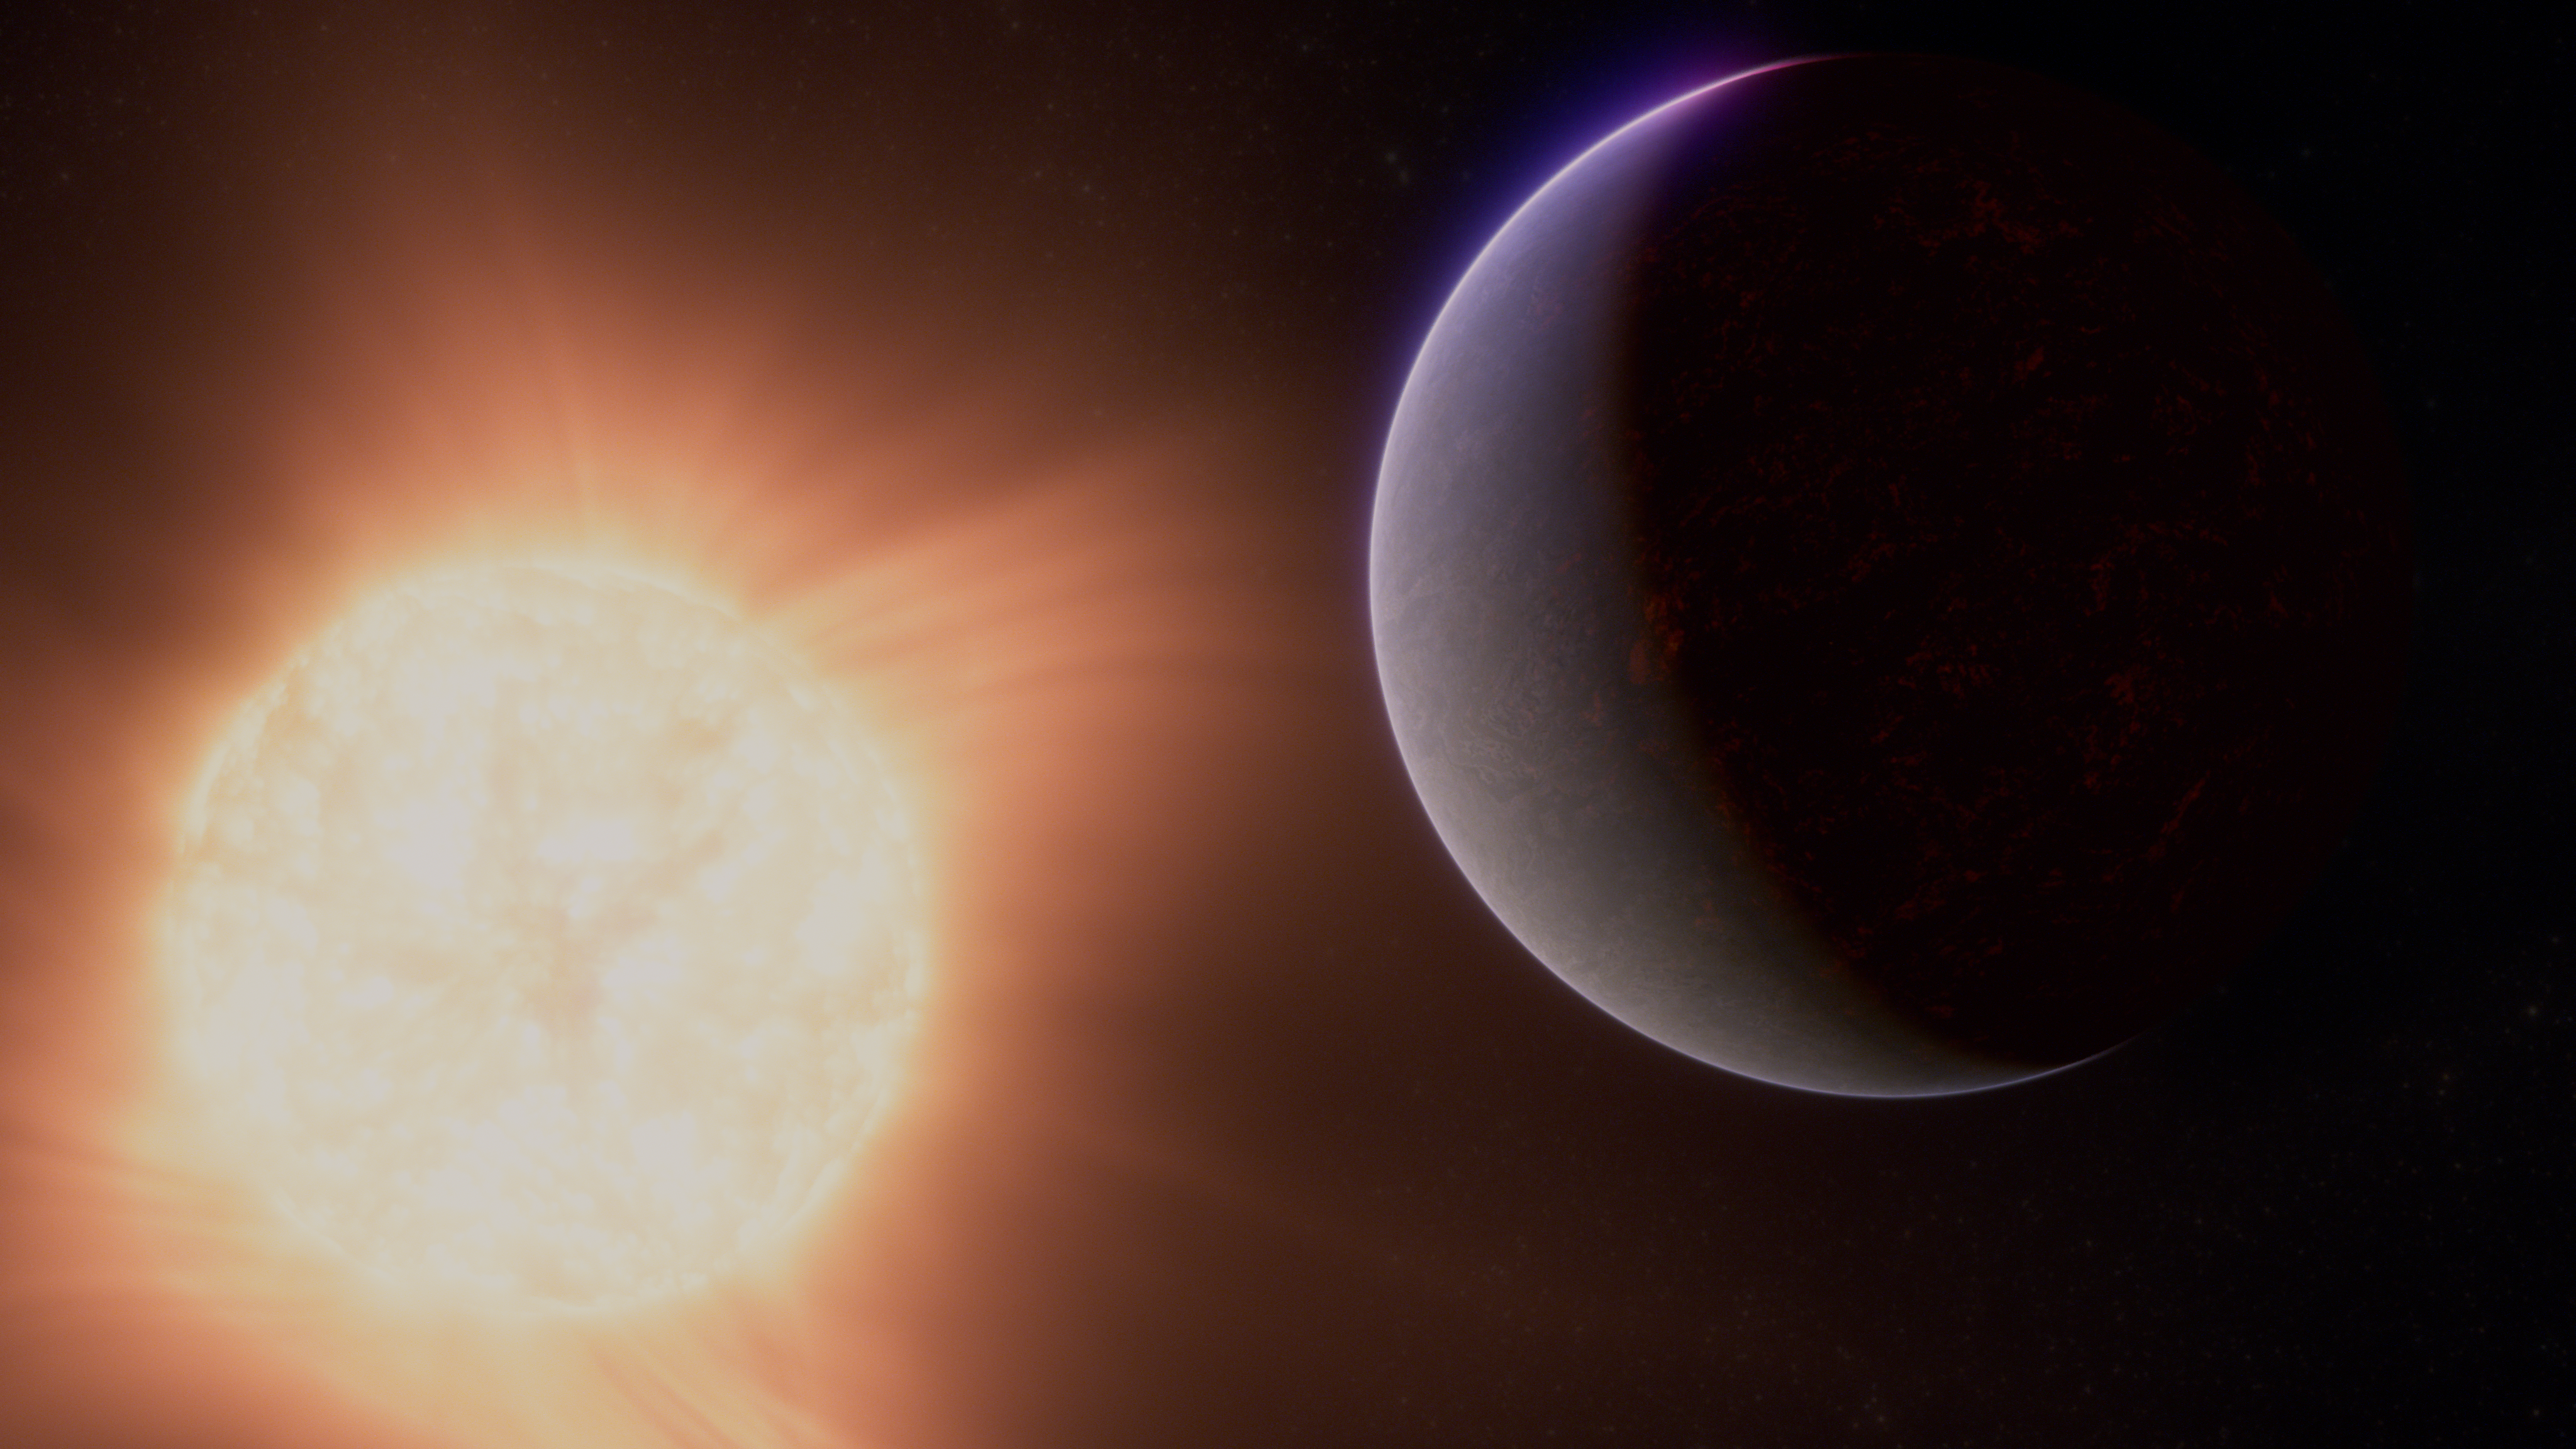 Illustration of a rocky exoplanet and its star. The star is in the background at the lower left and appears somewhat, but not significantly, smaller in the sky than the planet. It has a bright orange-red glow, and appears to have an active surface. The planet is in the foreground to the upper right of the star. The left quarter of the planet (the side facing the star) is lit, while the rest is in shadow. The planet has hints of a rocky, partly molten surface beneath the haze of a thin atmosphere. The boundary between the day and night sides of the planet is fuzzy.